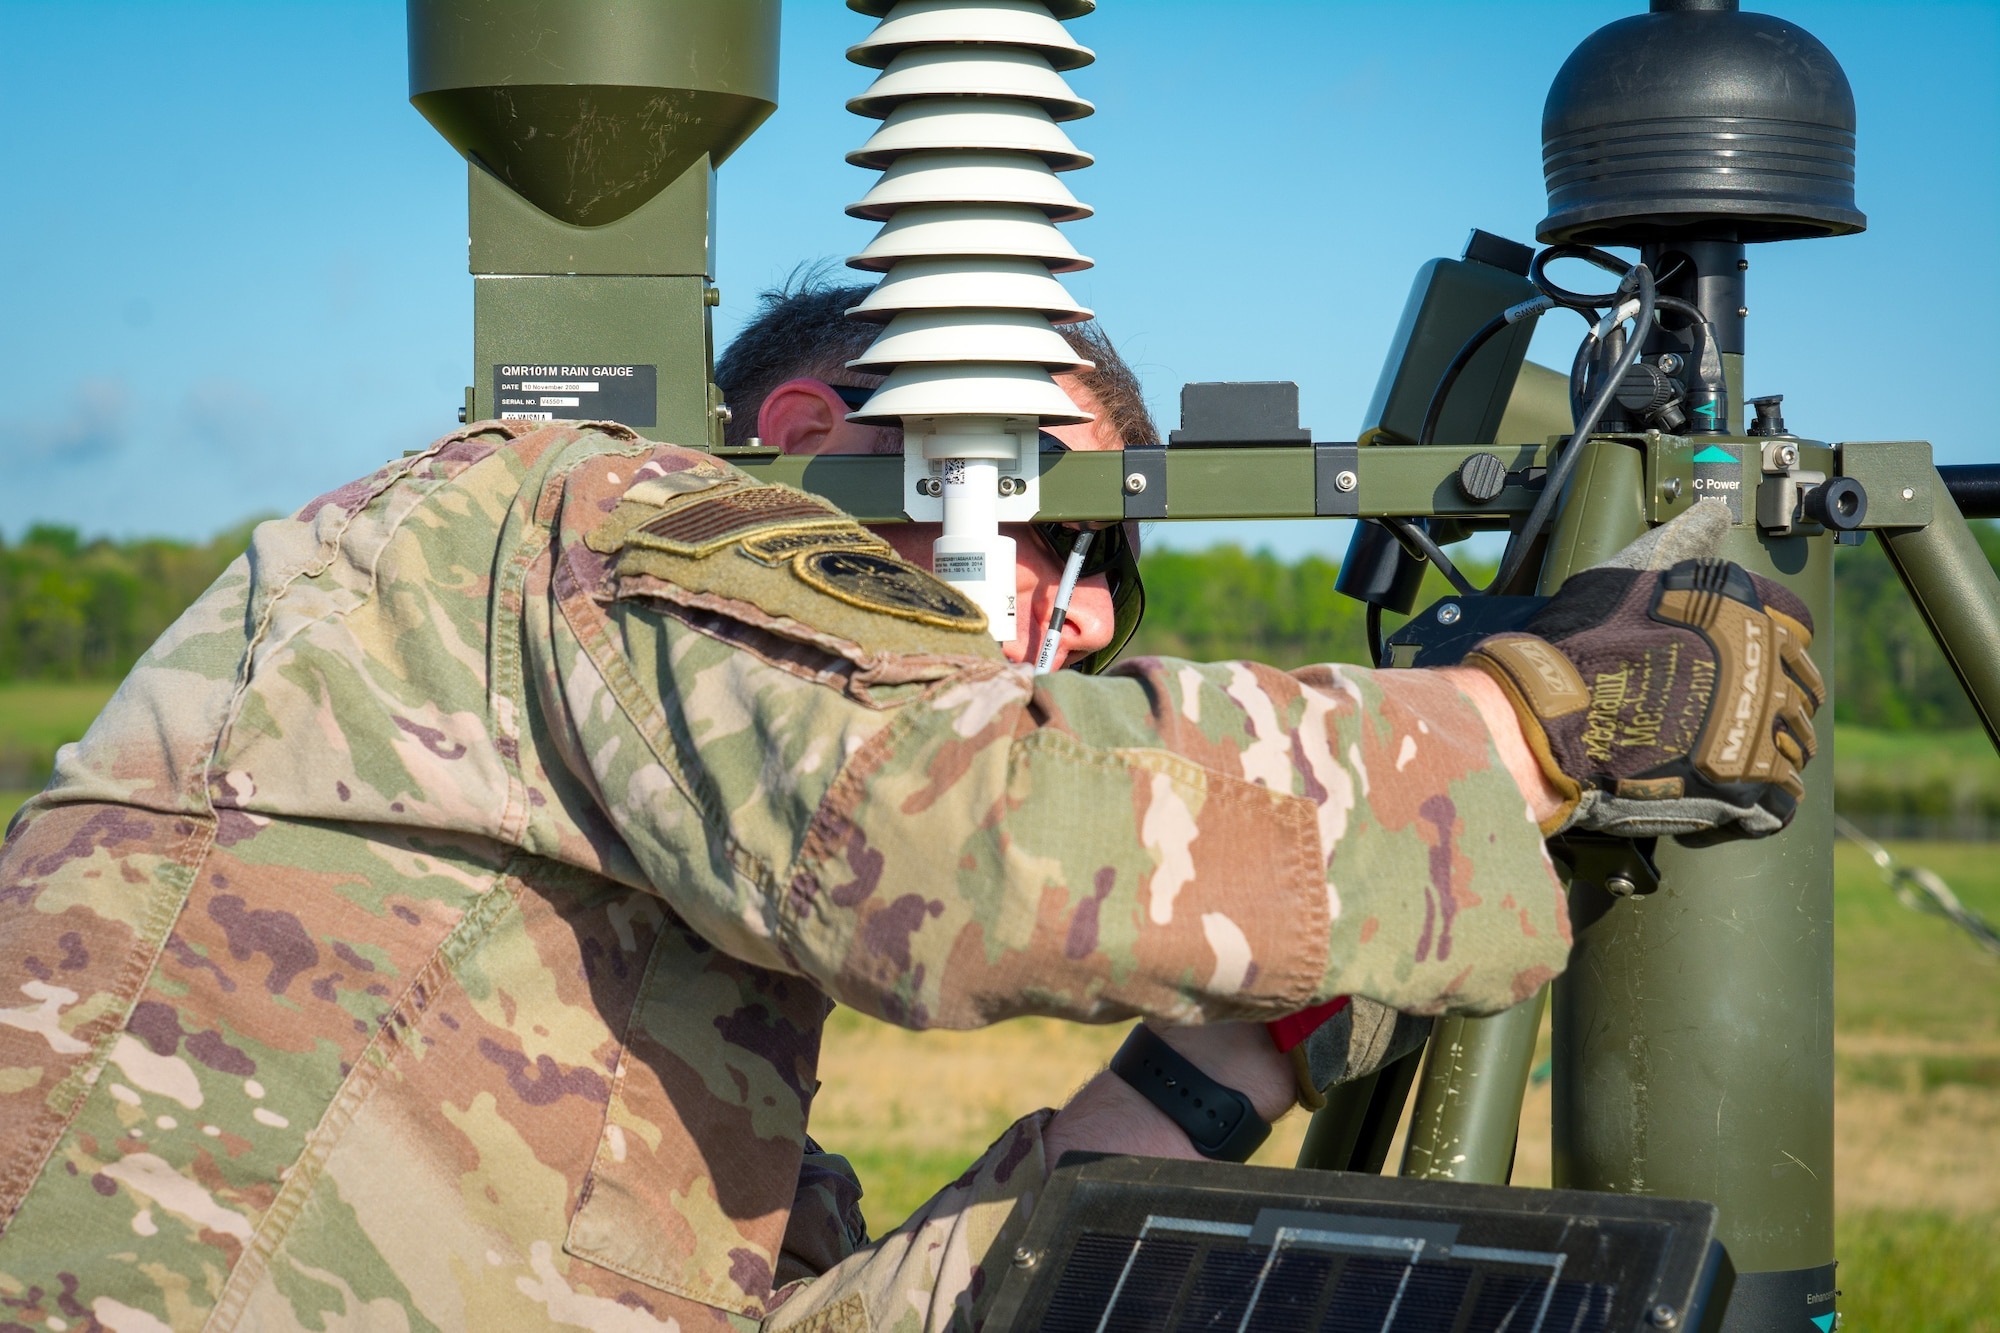 An Airman with the 156th Weather Flight (WF) attaches a power distribution mount to a TMQ-53 portable weather station during training held at the regional training site in New London, N.C., April 11, 2021. The training the 156th WF conducts is conducted a few times a year to keep members current on their annual position qualification.